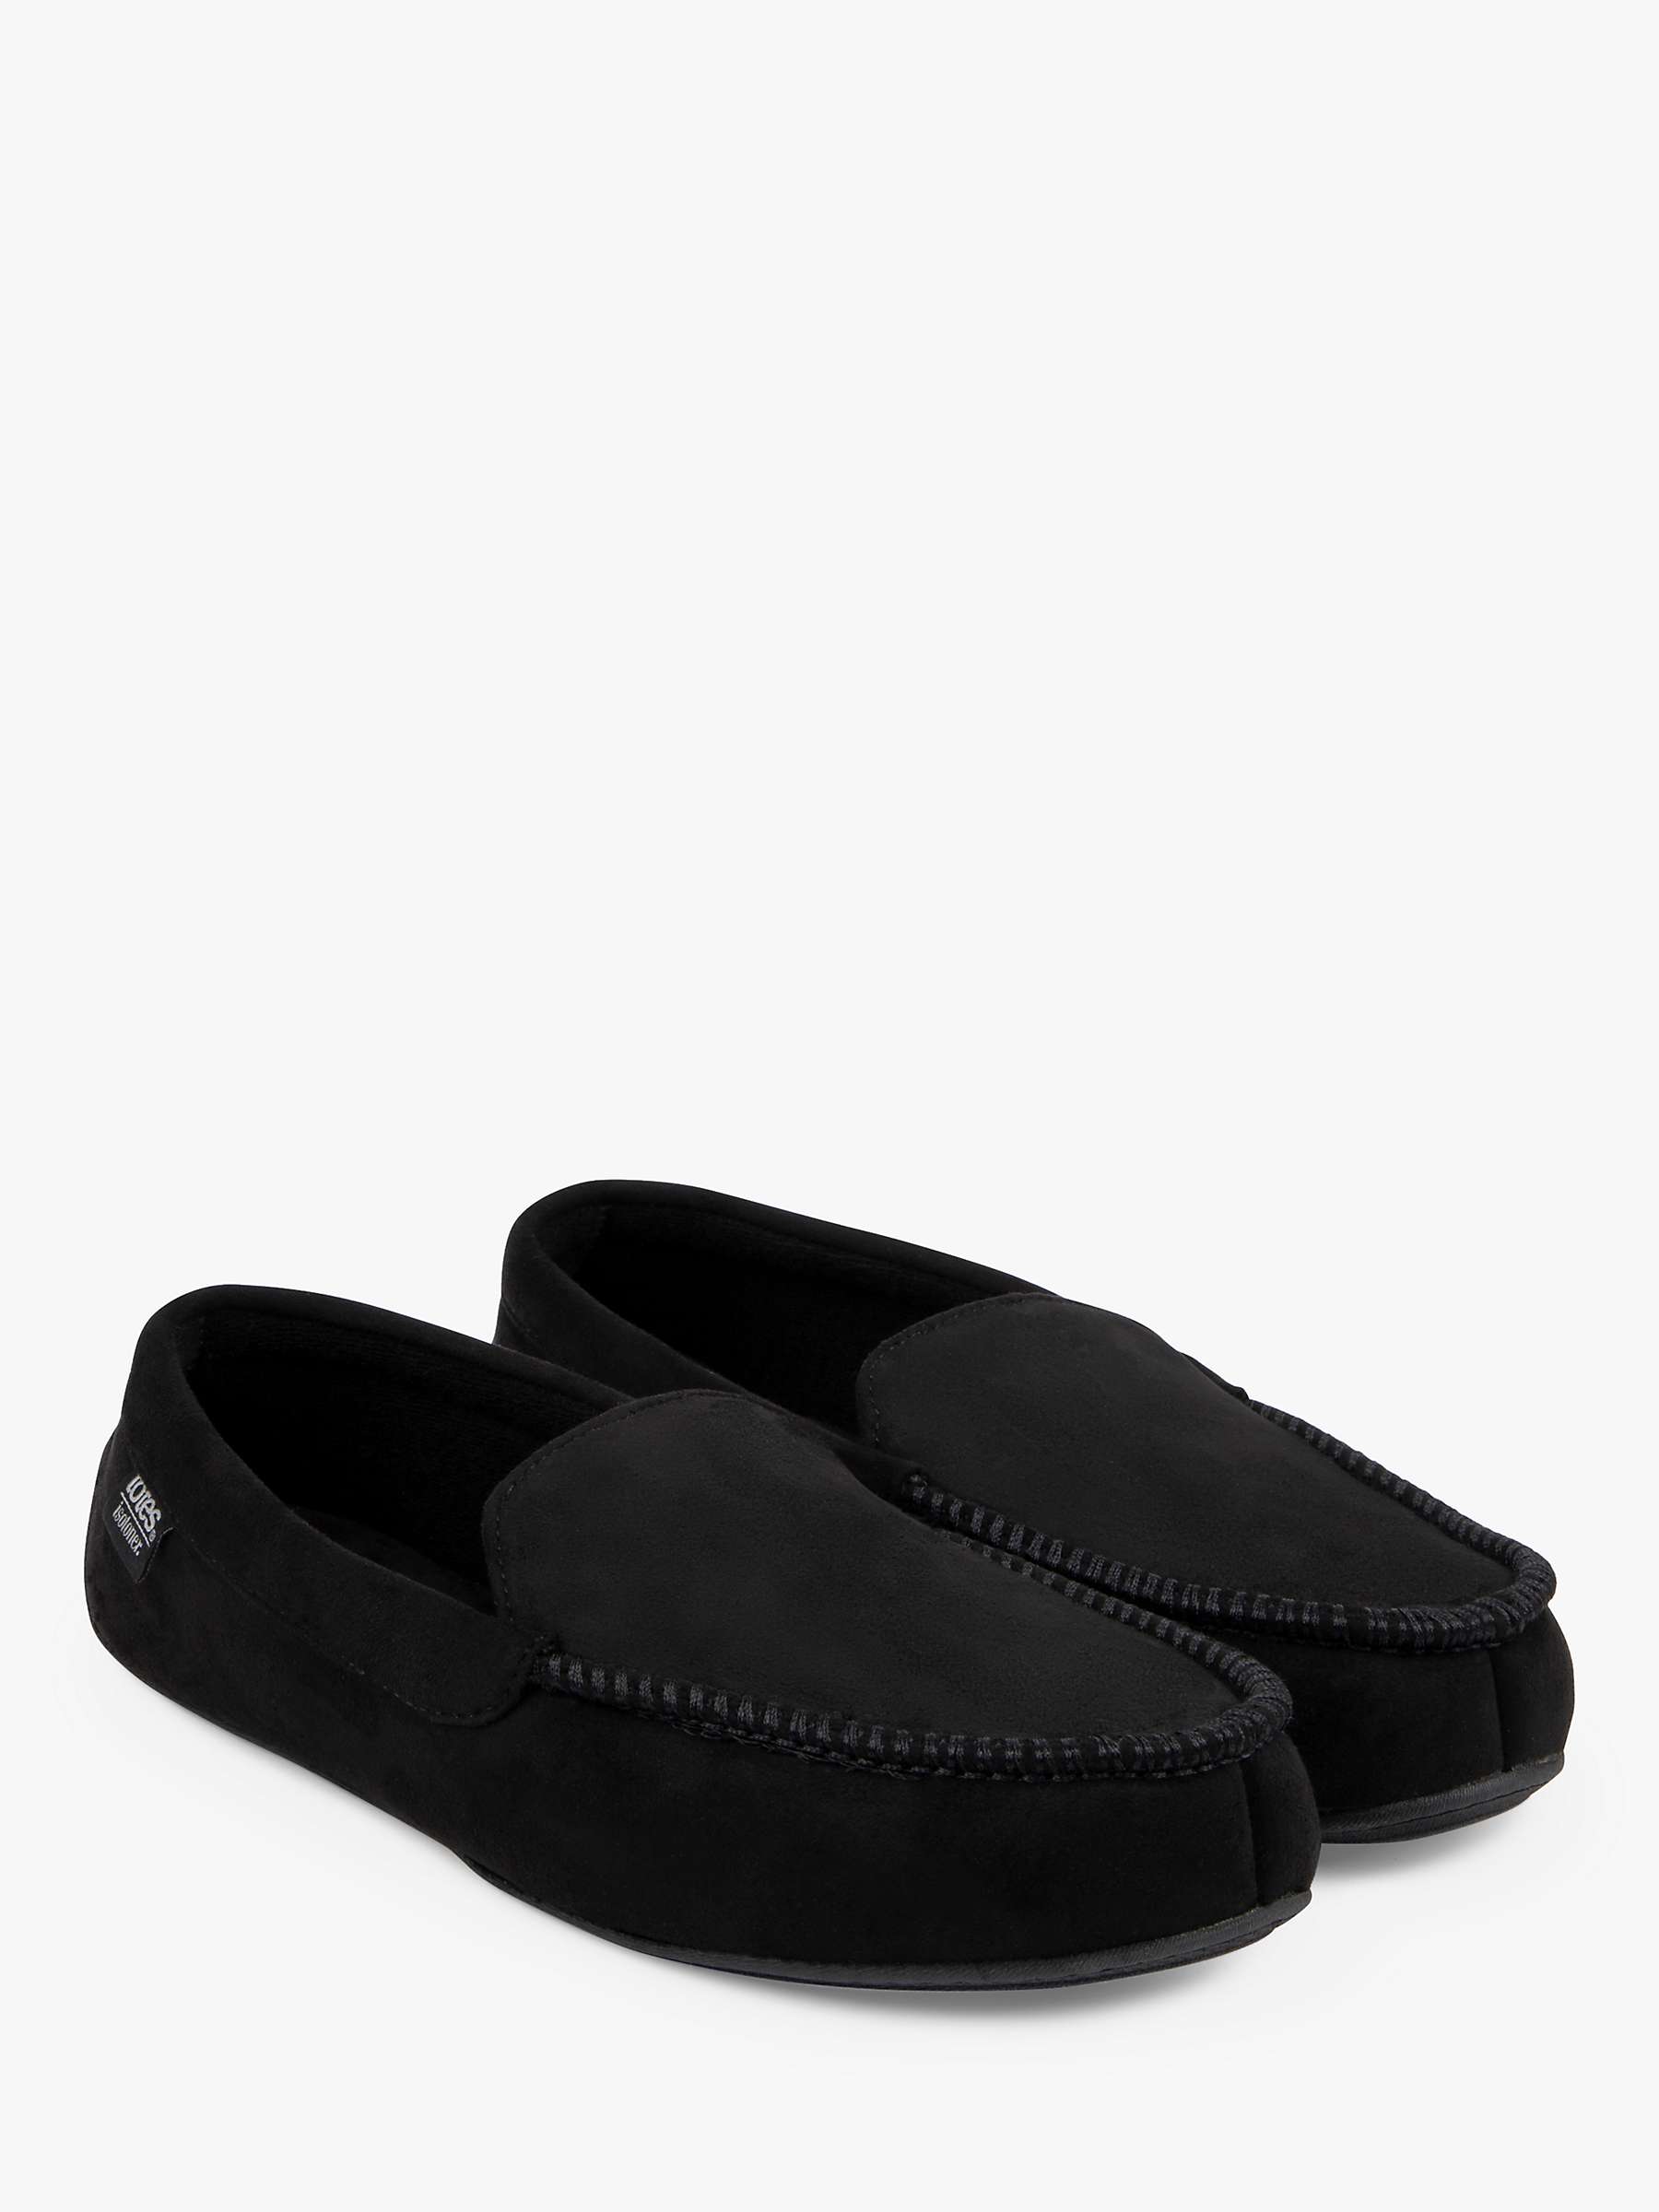 Buy totes Pillowstep Driving Moccasin Slippers Online at johnlewis.com